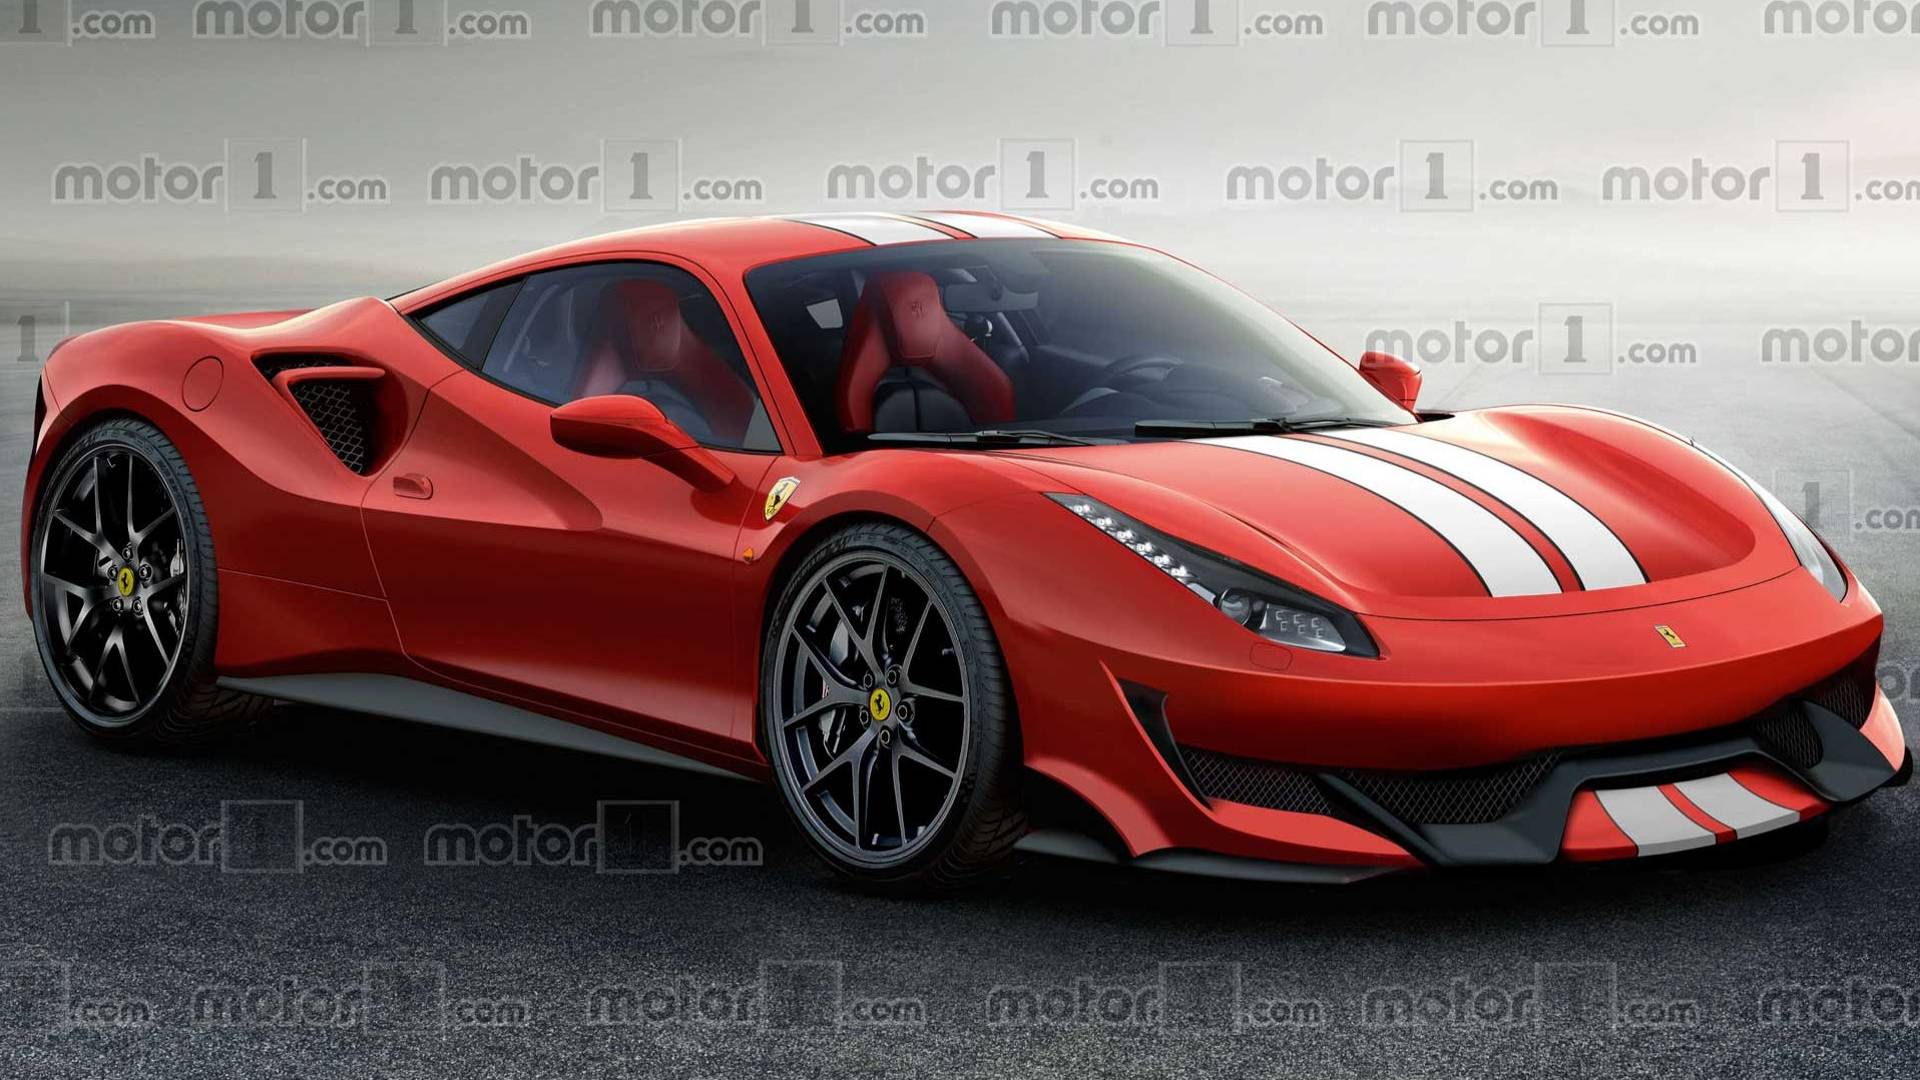 We Think The Ferrari 488 Sport Special Series Looks Like This